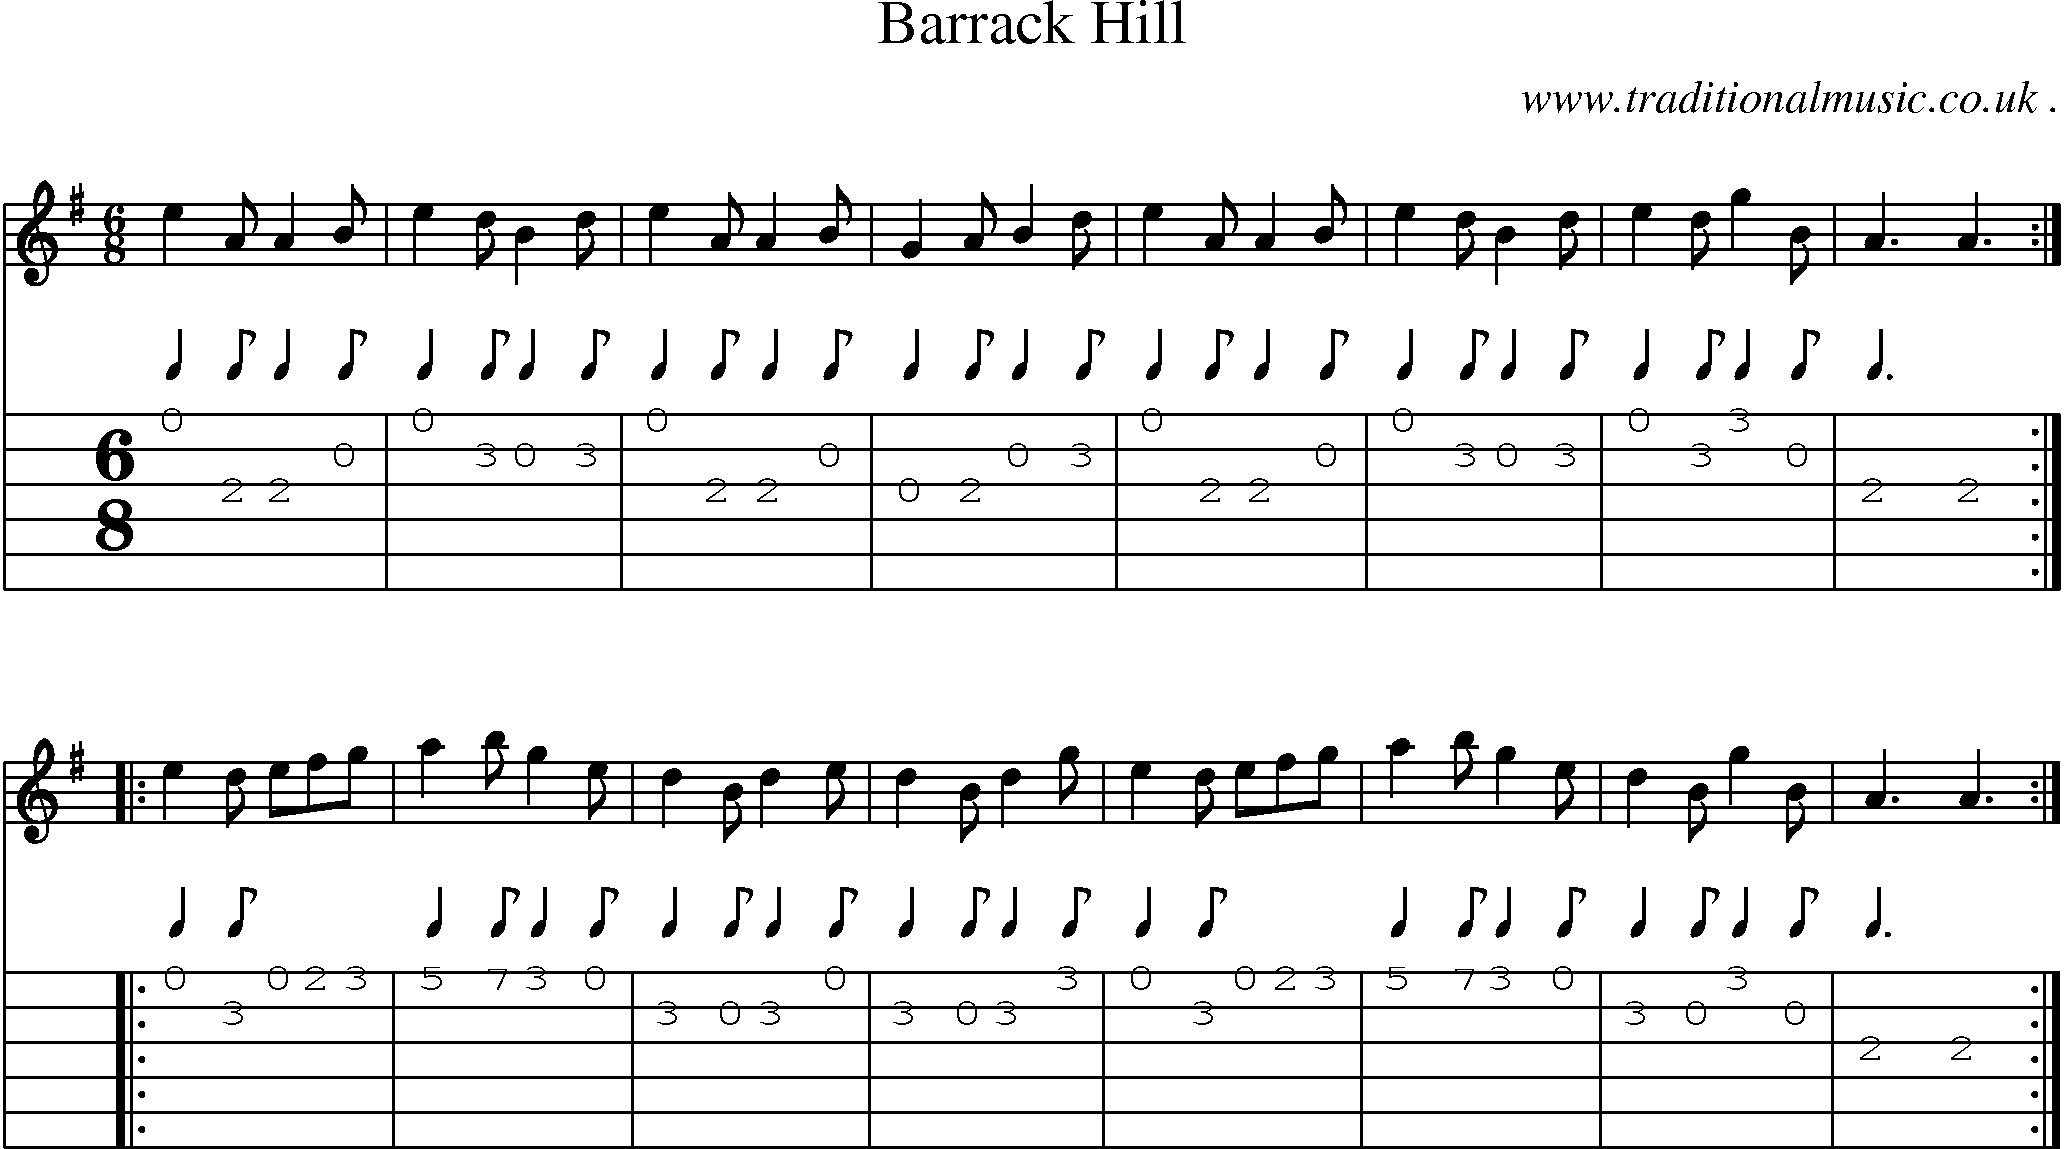 Sheet-Music and Guitar Tabs for Barrack Hill